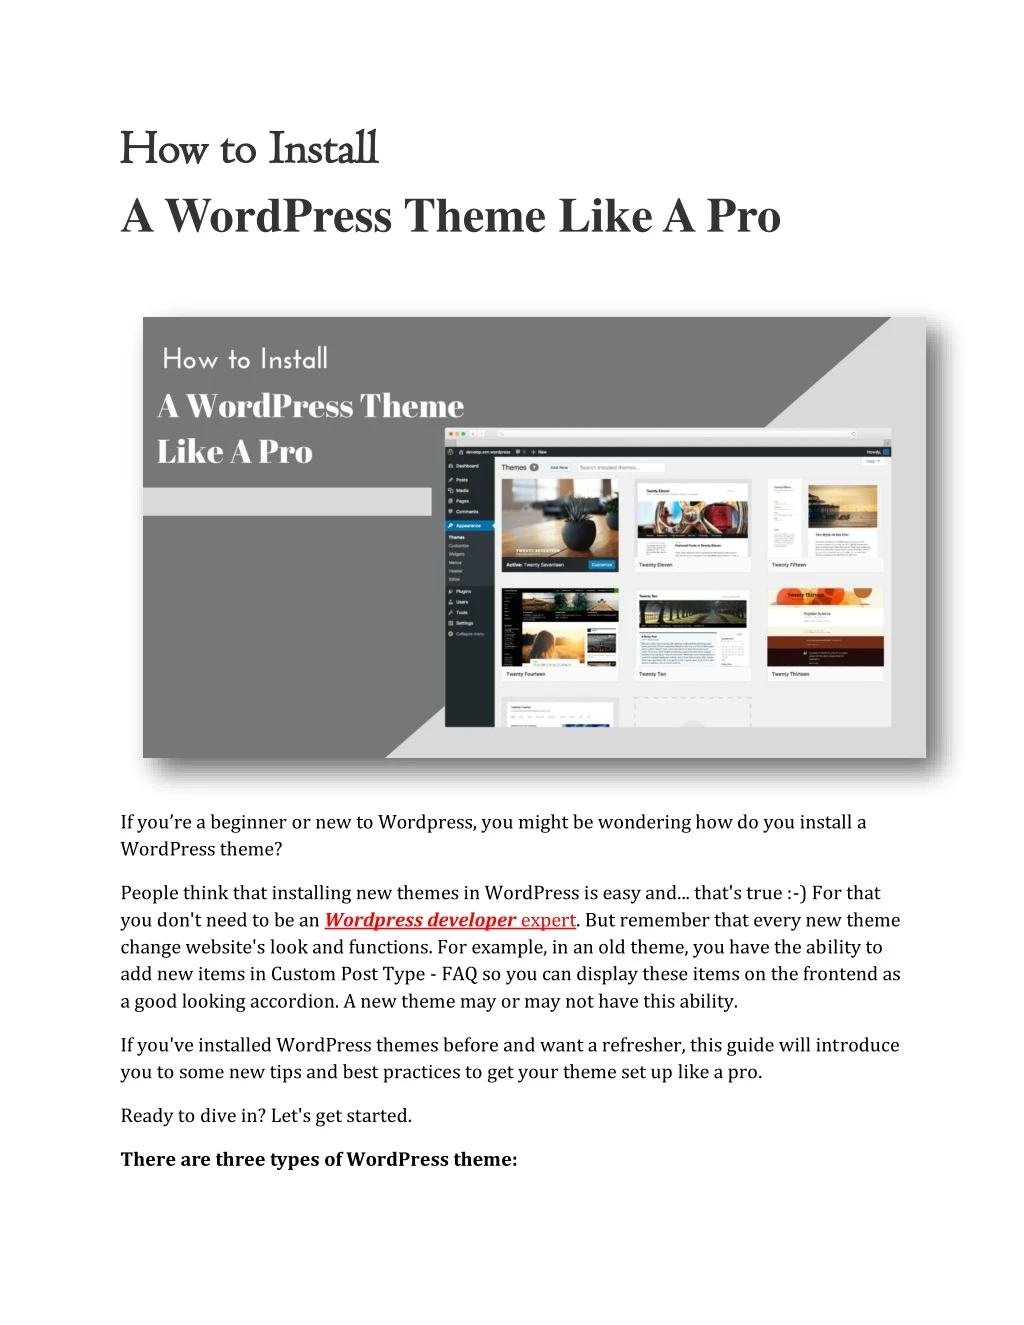 how to install how to install a wordpress theme